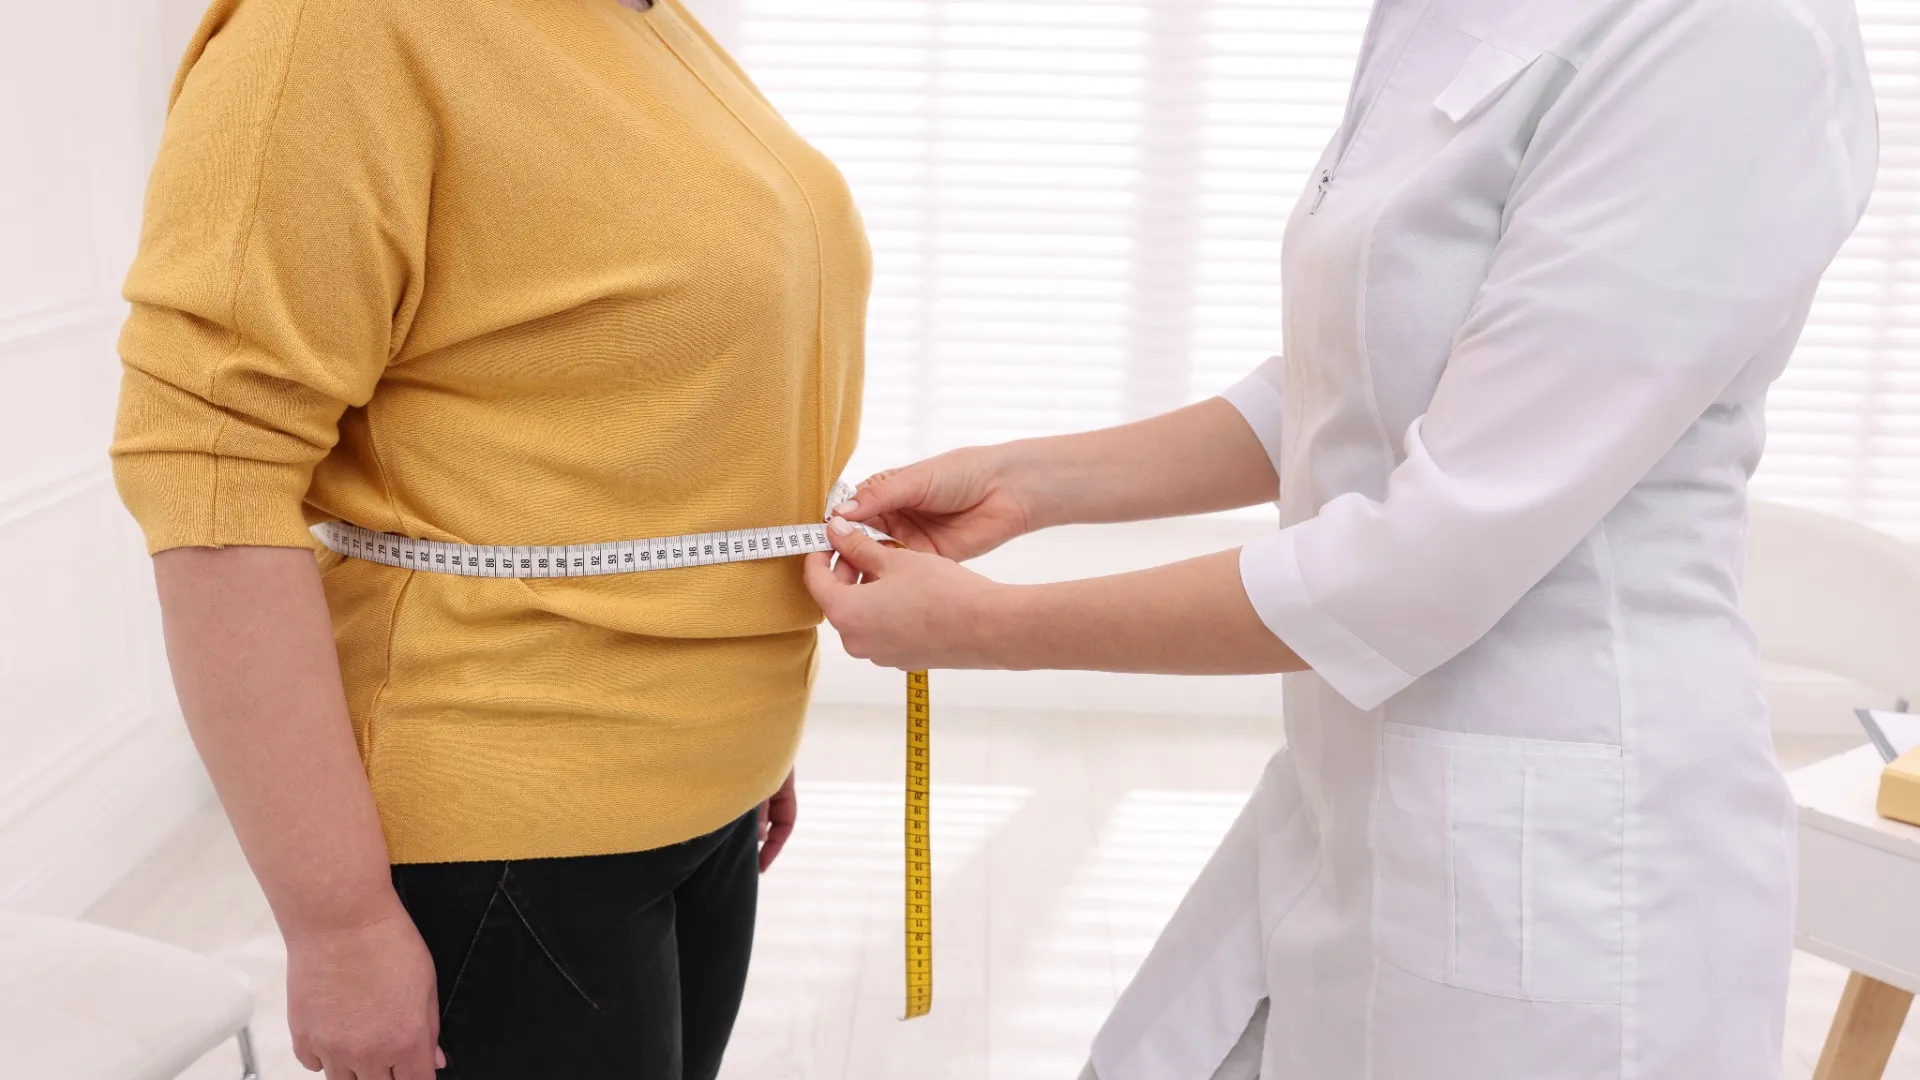 Metabolic Syndrome: An Underlying Factor in Most Chronic Conditions